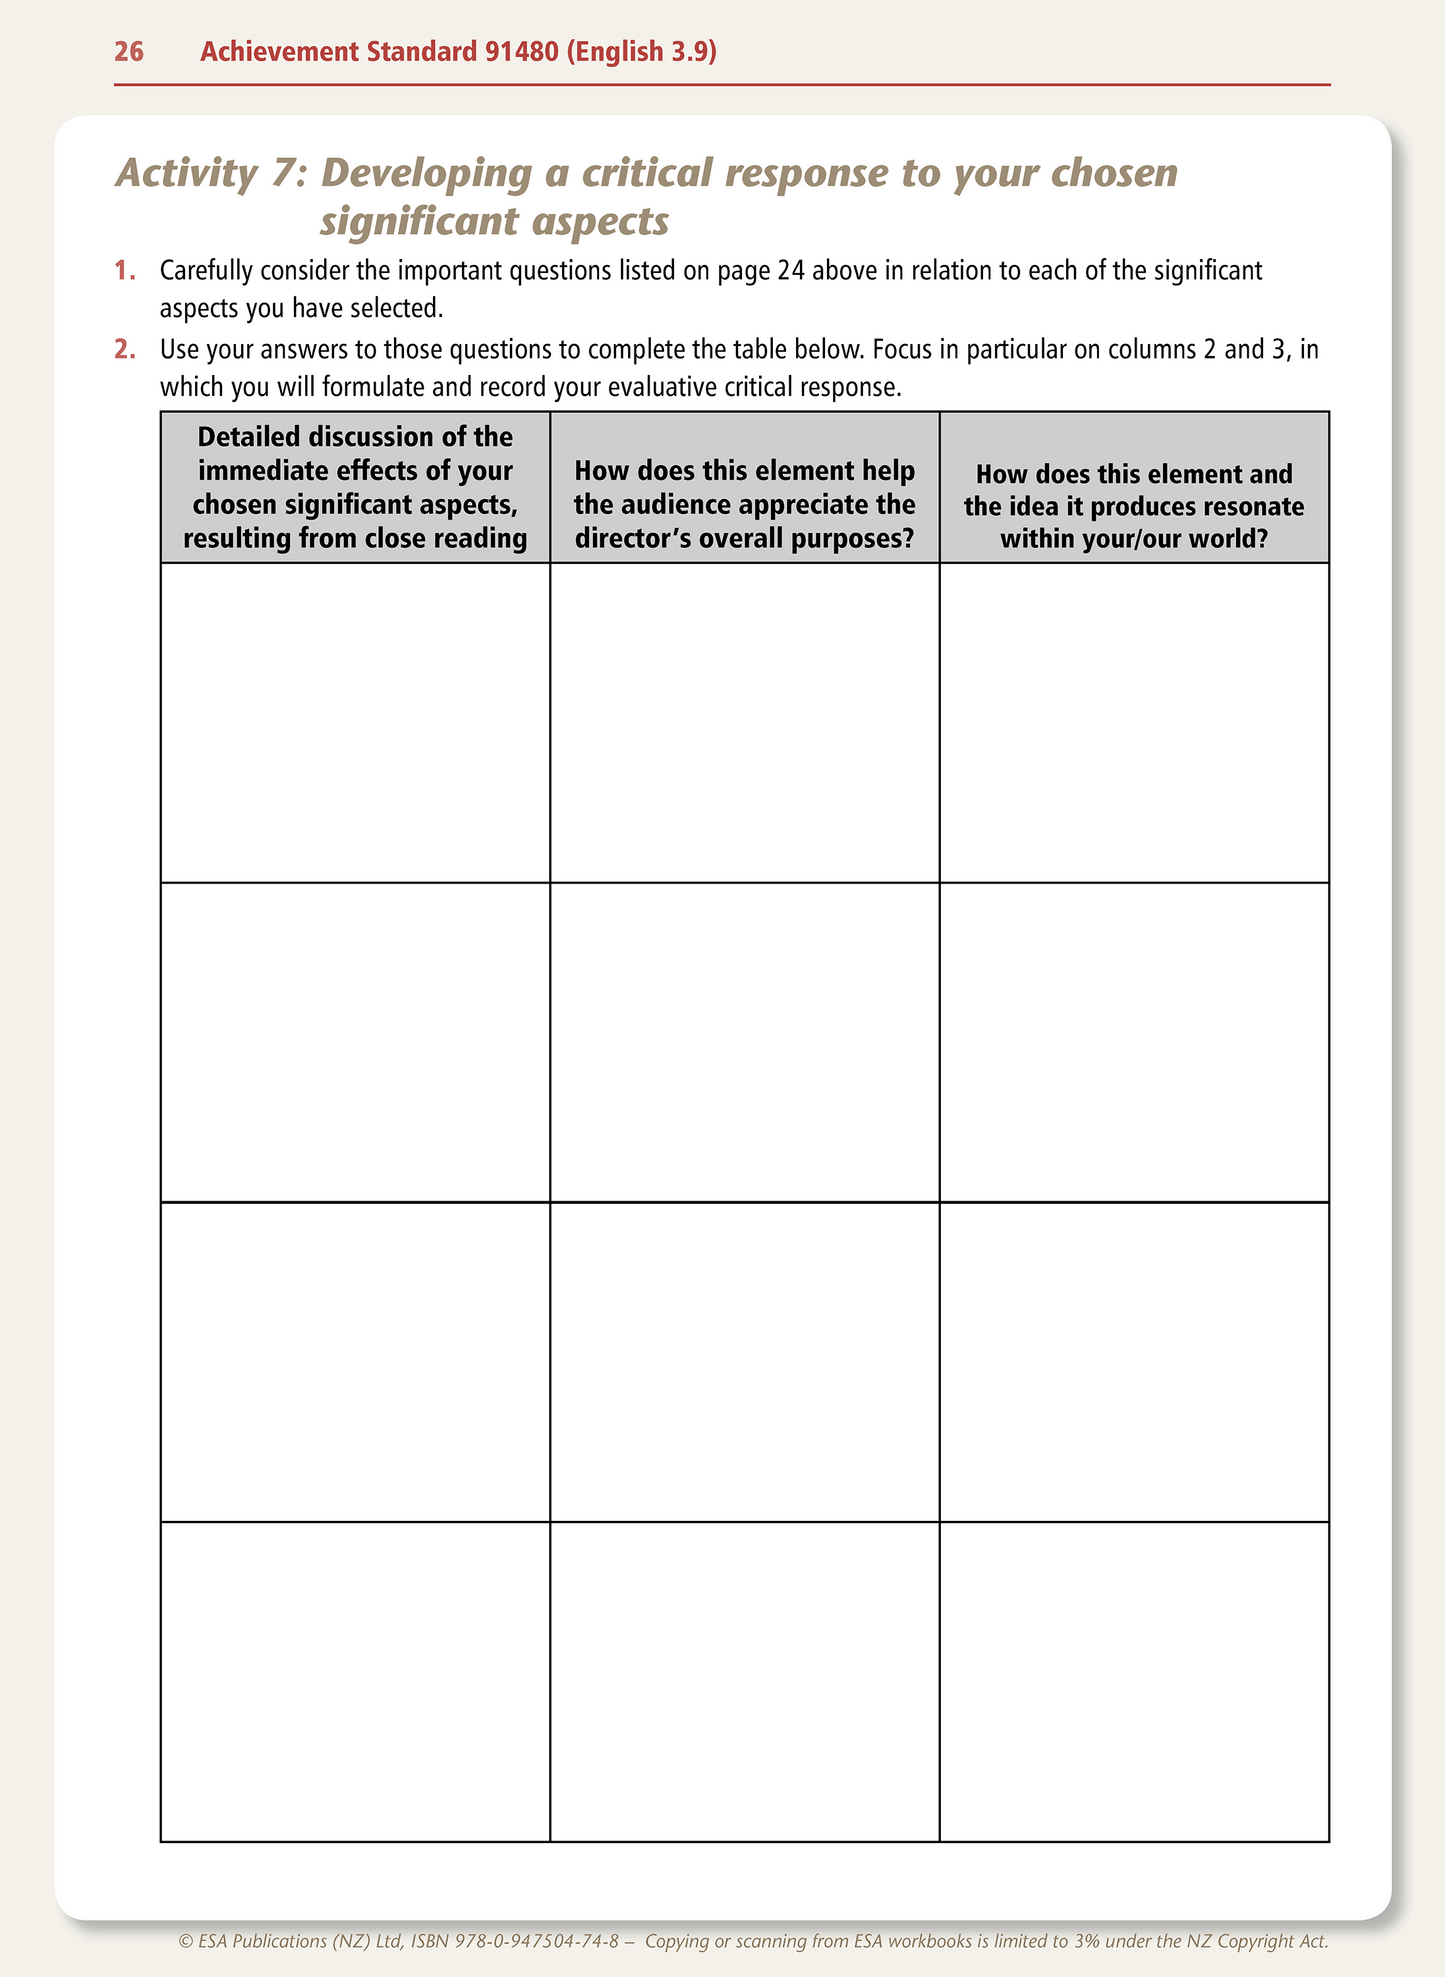 Level 3 Close Viewing of a Visual Text 3.9 Learning Workbook